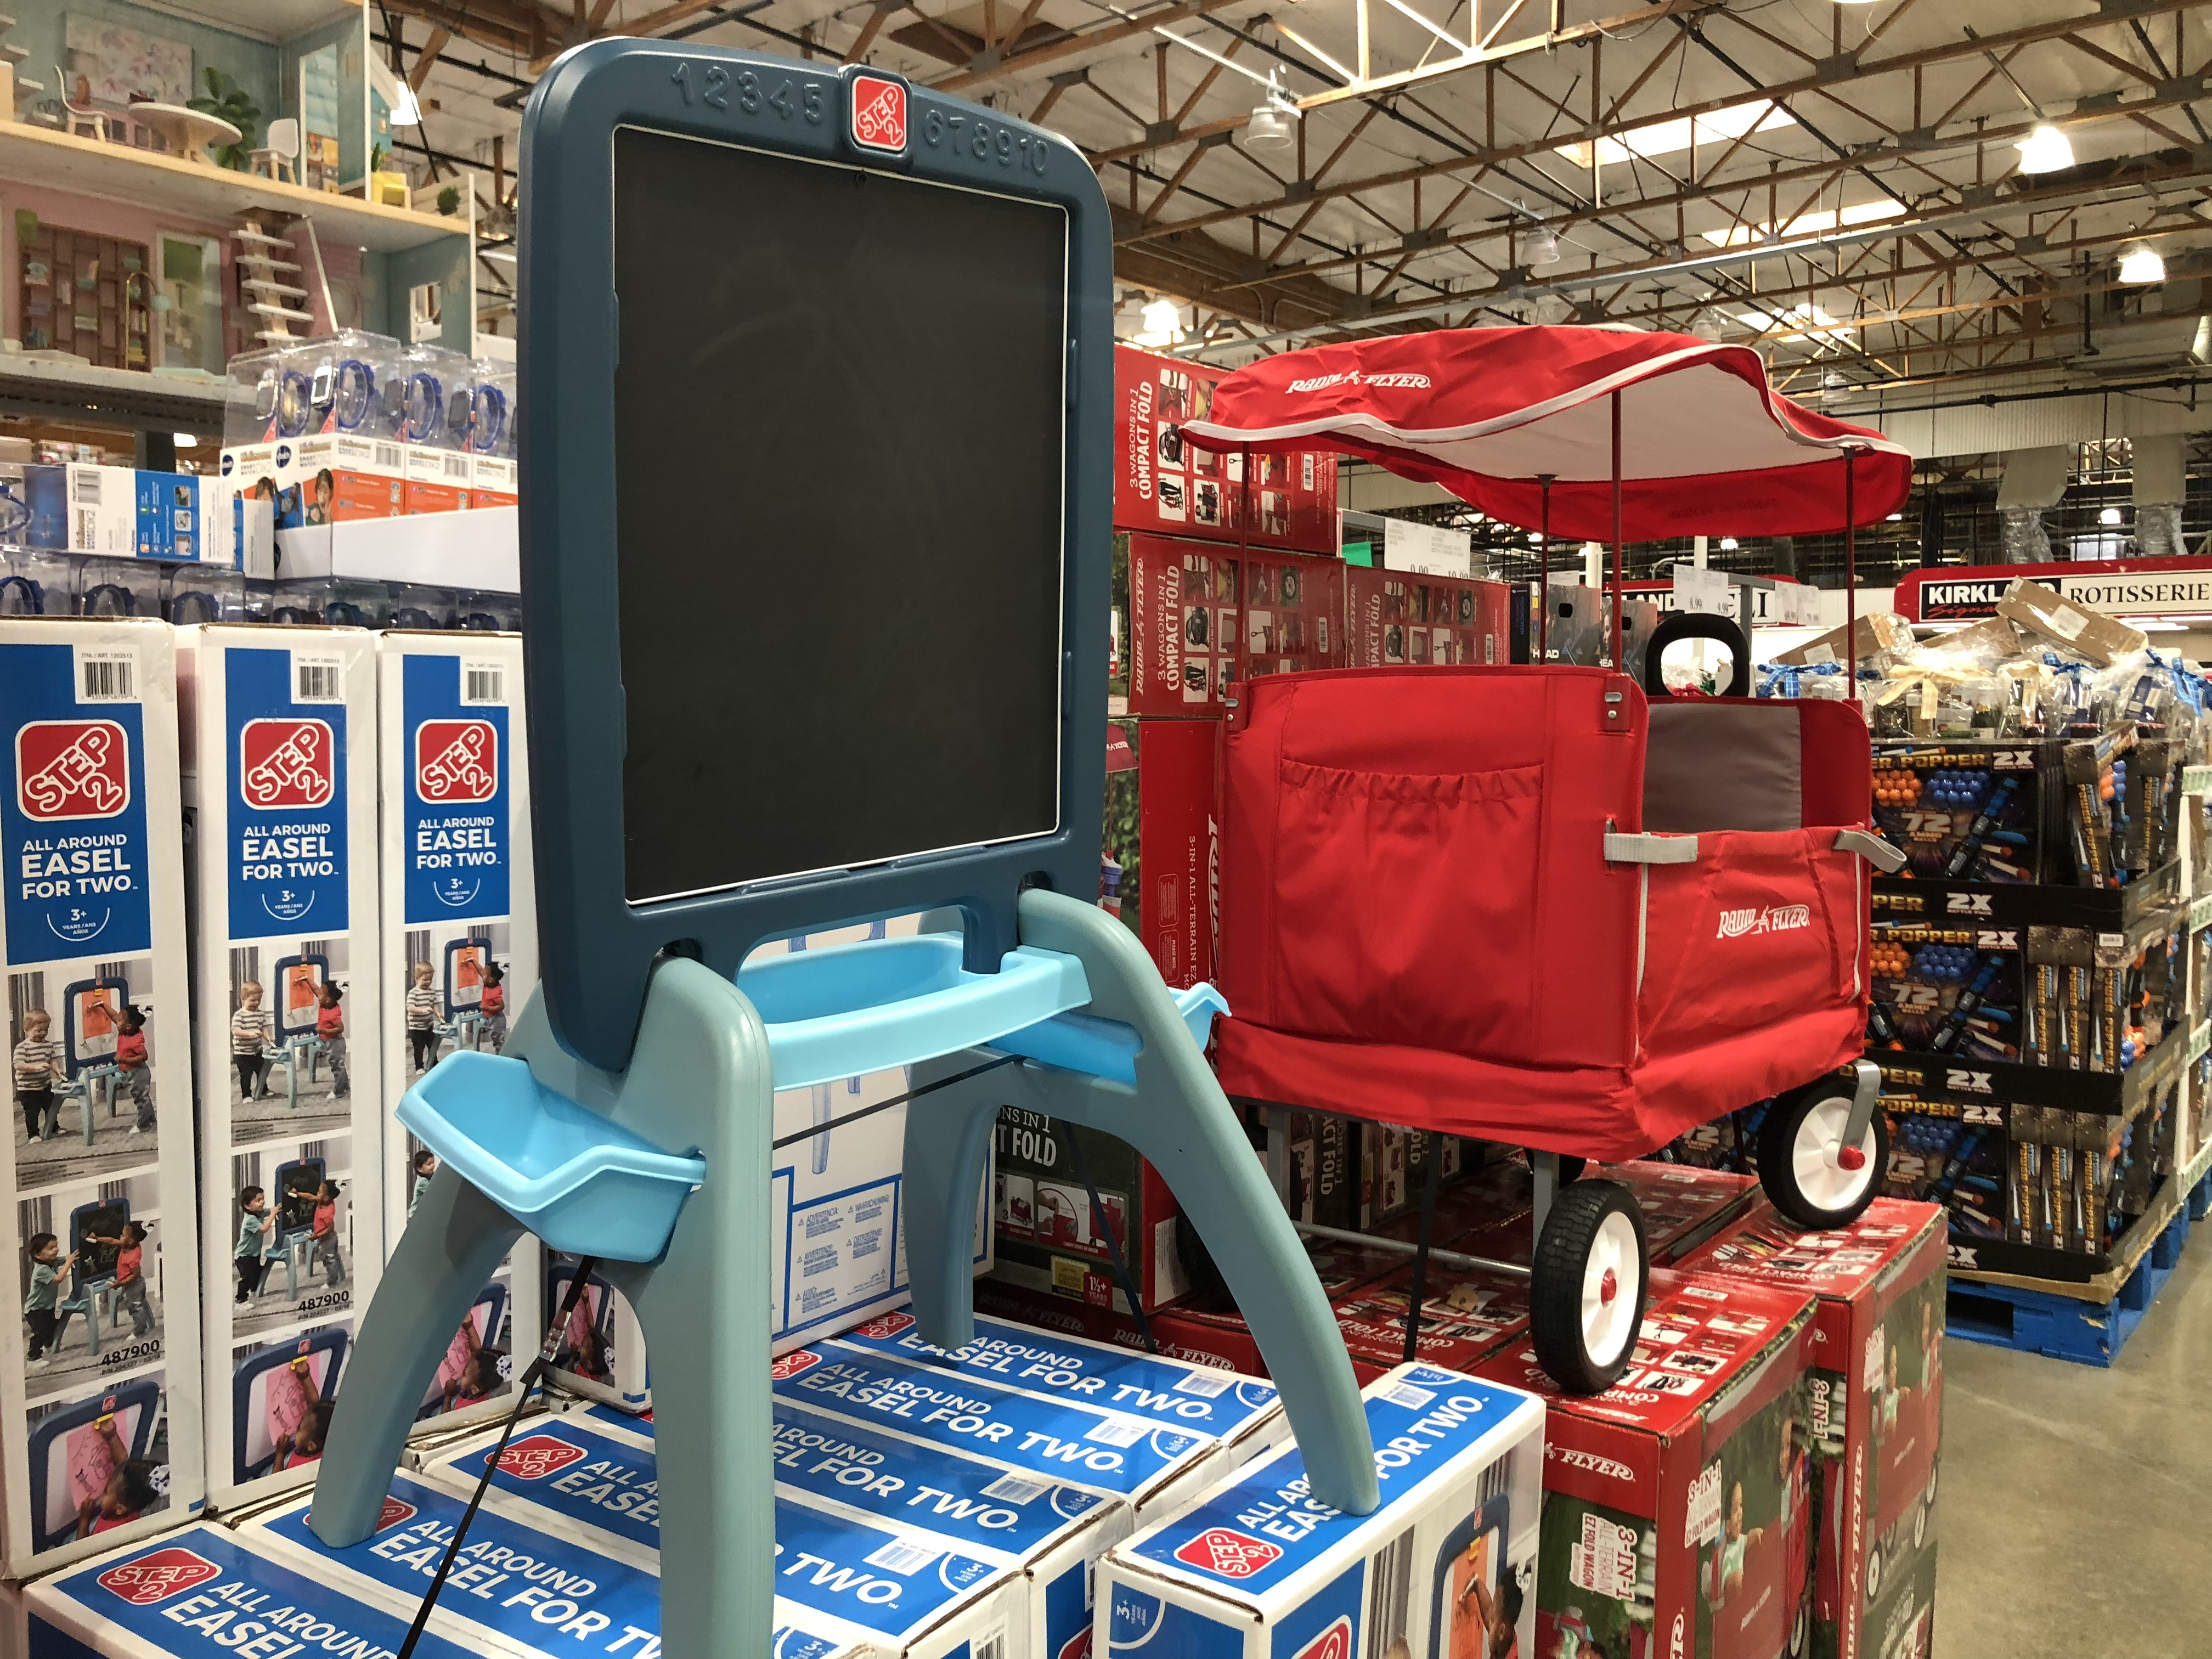 The best holiday toy deals for 2018 include the Step2 Easel at Costco